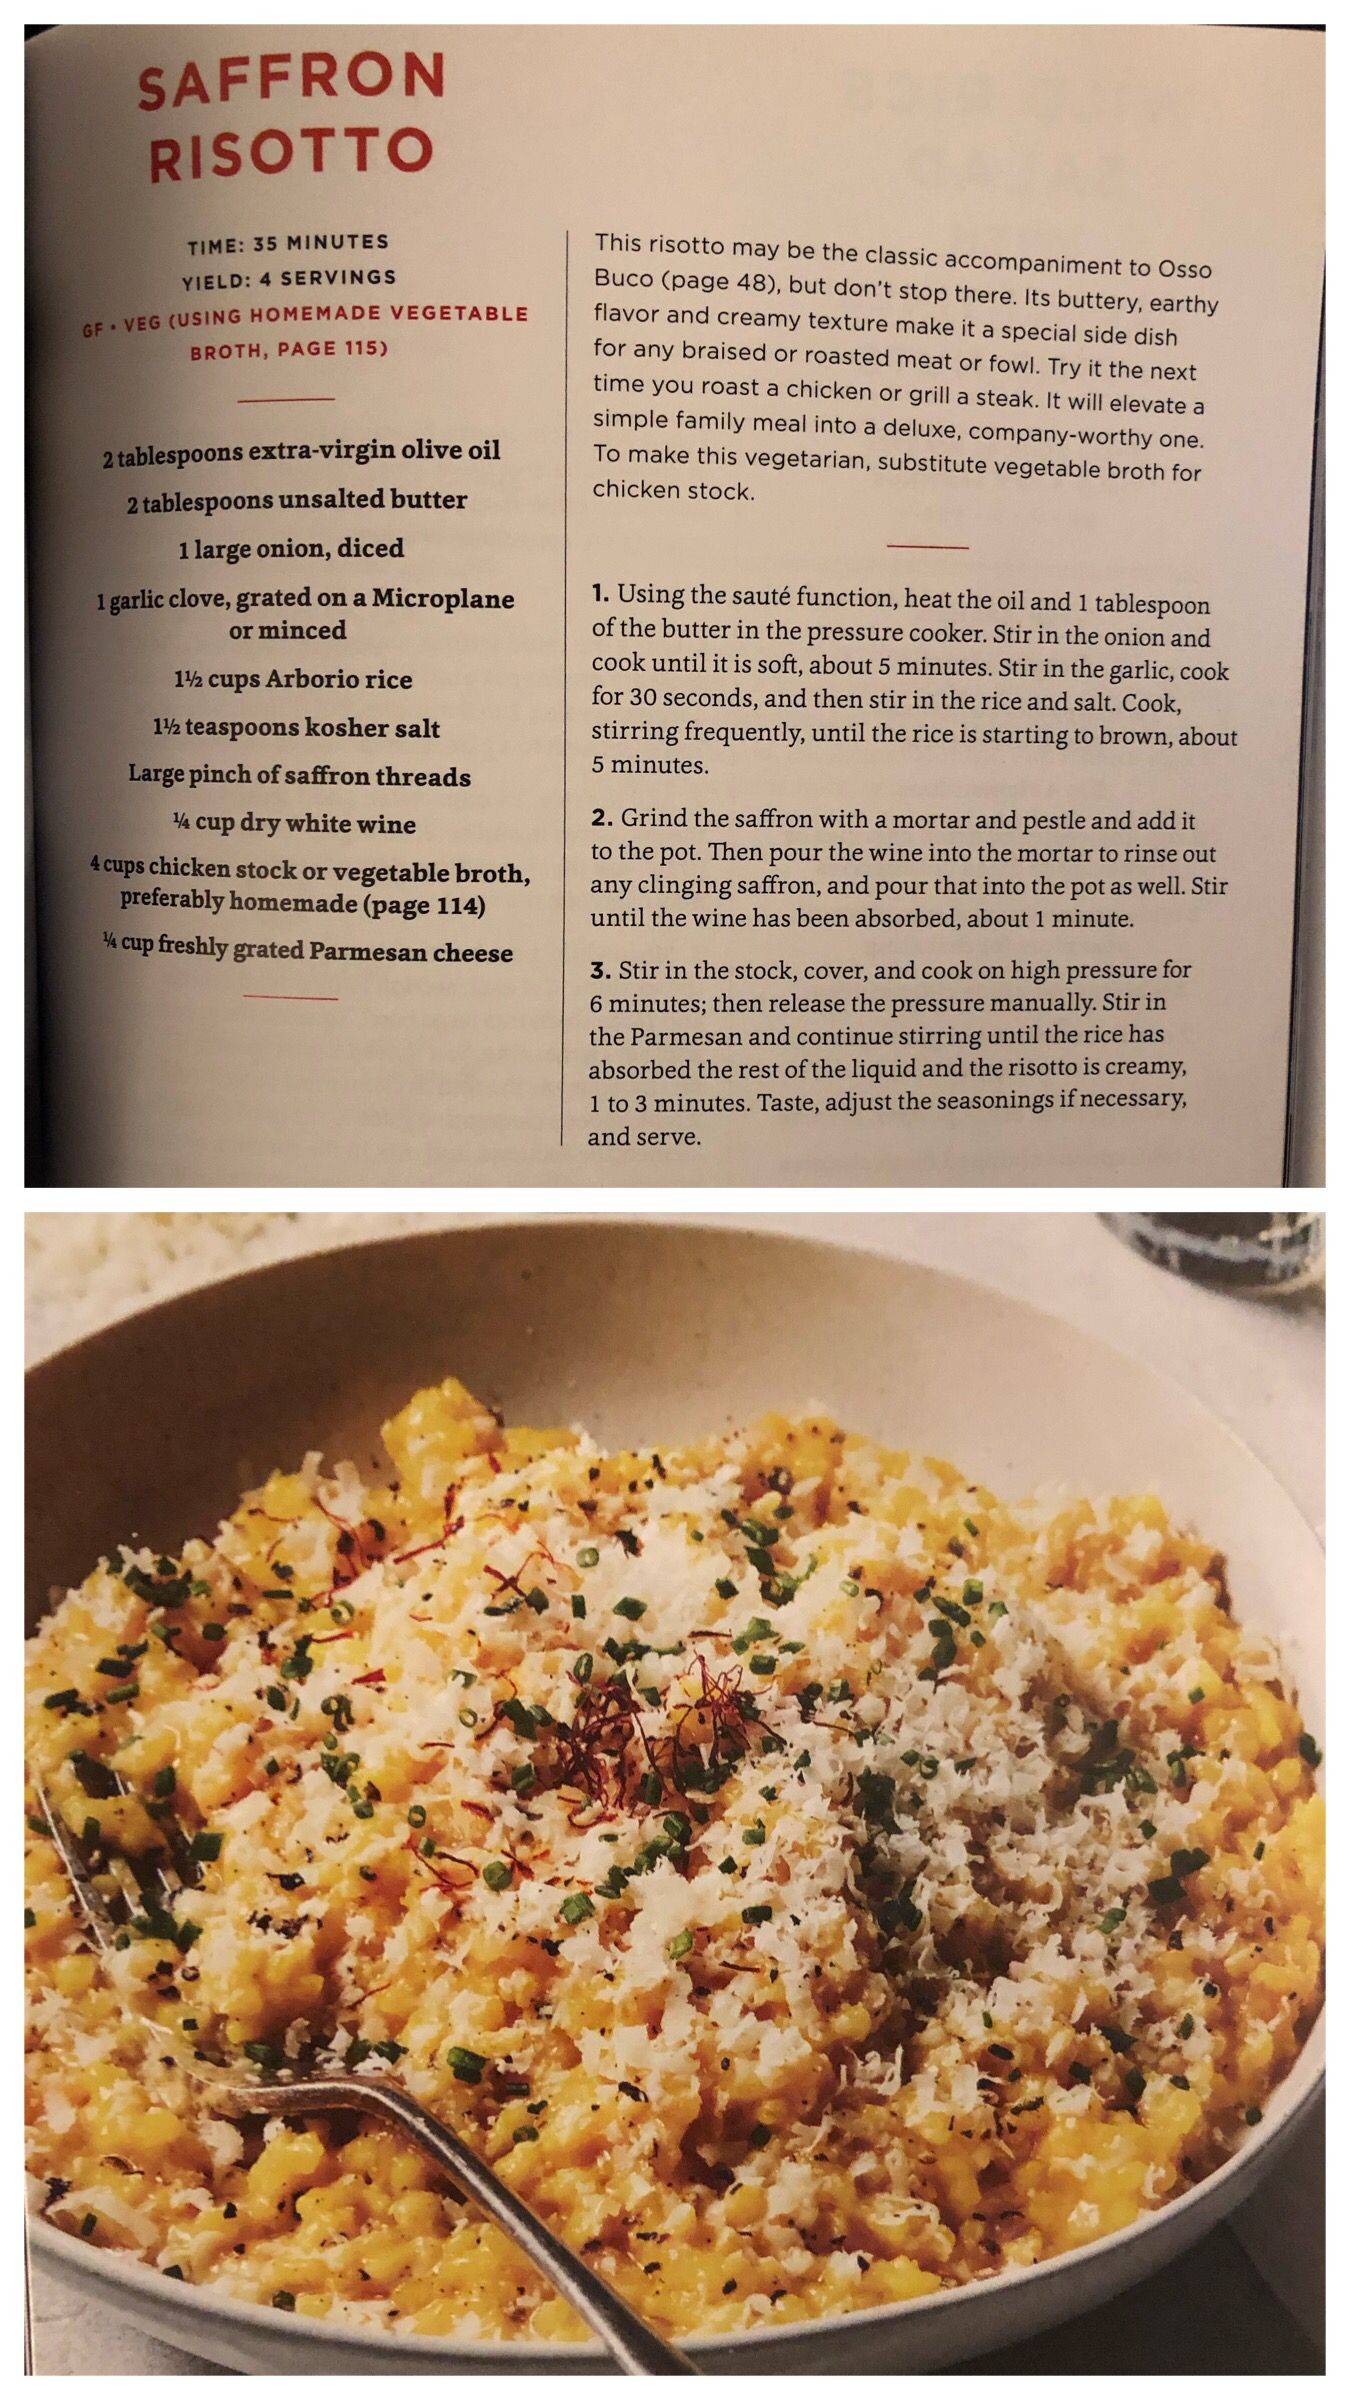 Melissa Clark Instant Pot Recipes
 From Dinner in an Instant by Melissa Clark